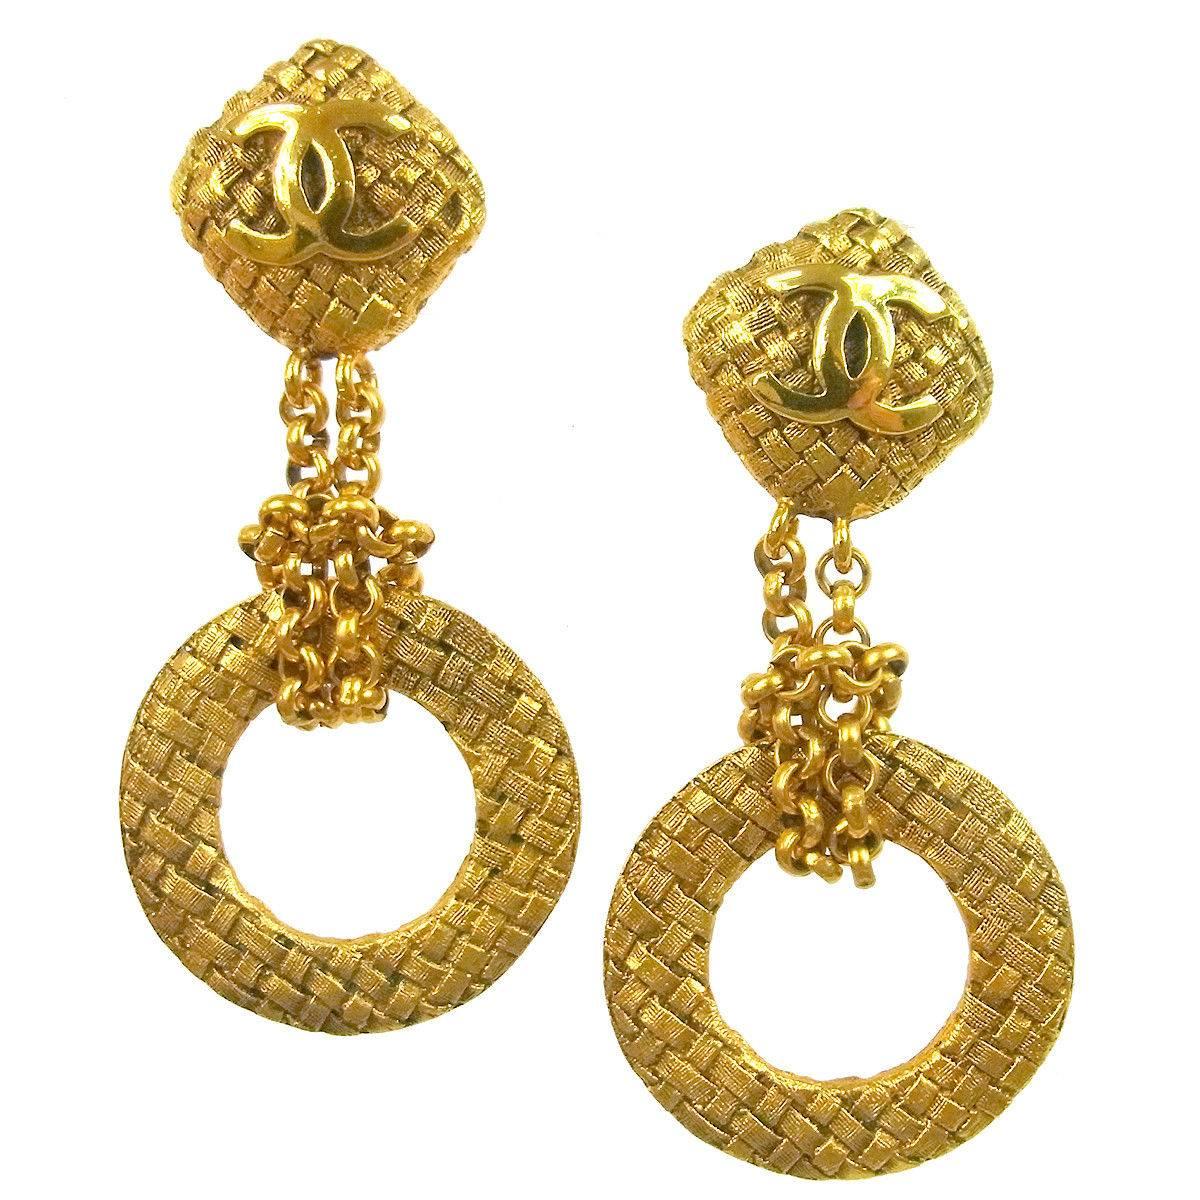 Chanel Gold Textured Two Tier Cushion Chandelier Hoop Evening Earrings in Box